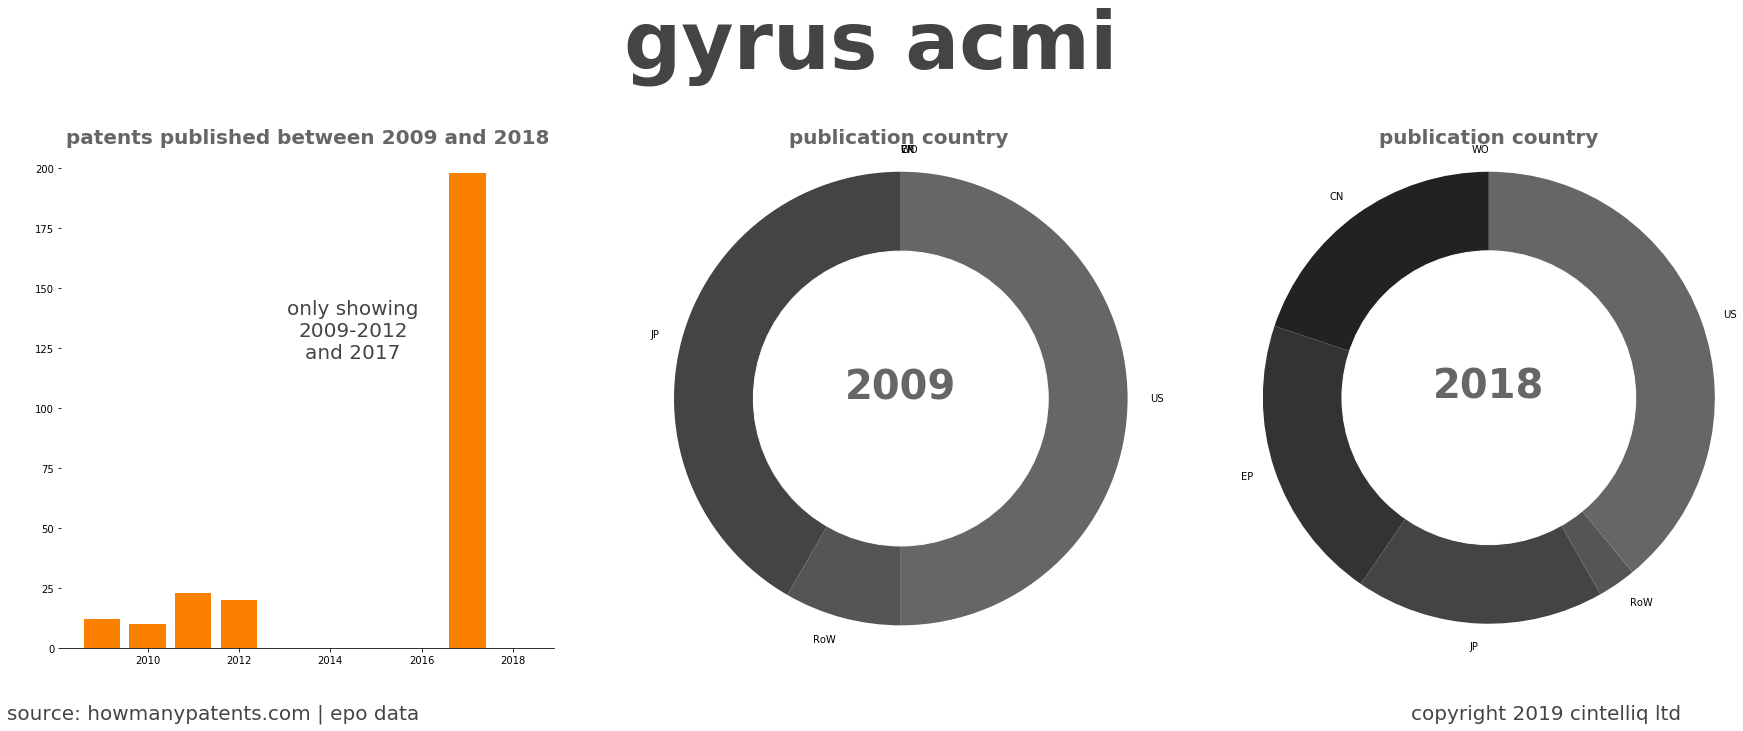 summary of patents for Gyrus Acmi